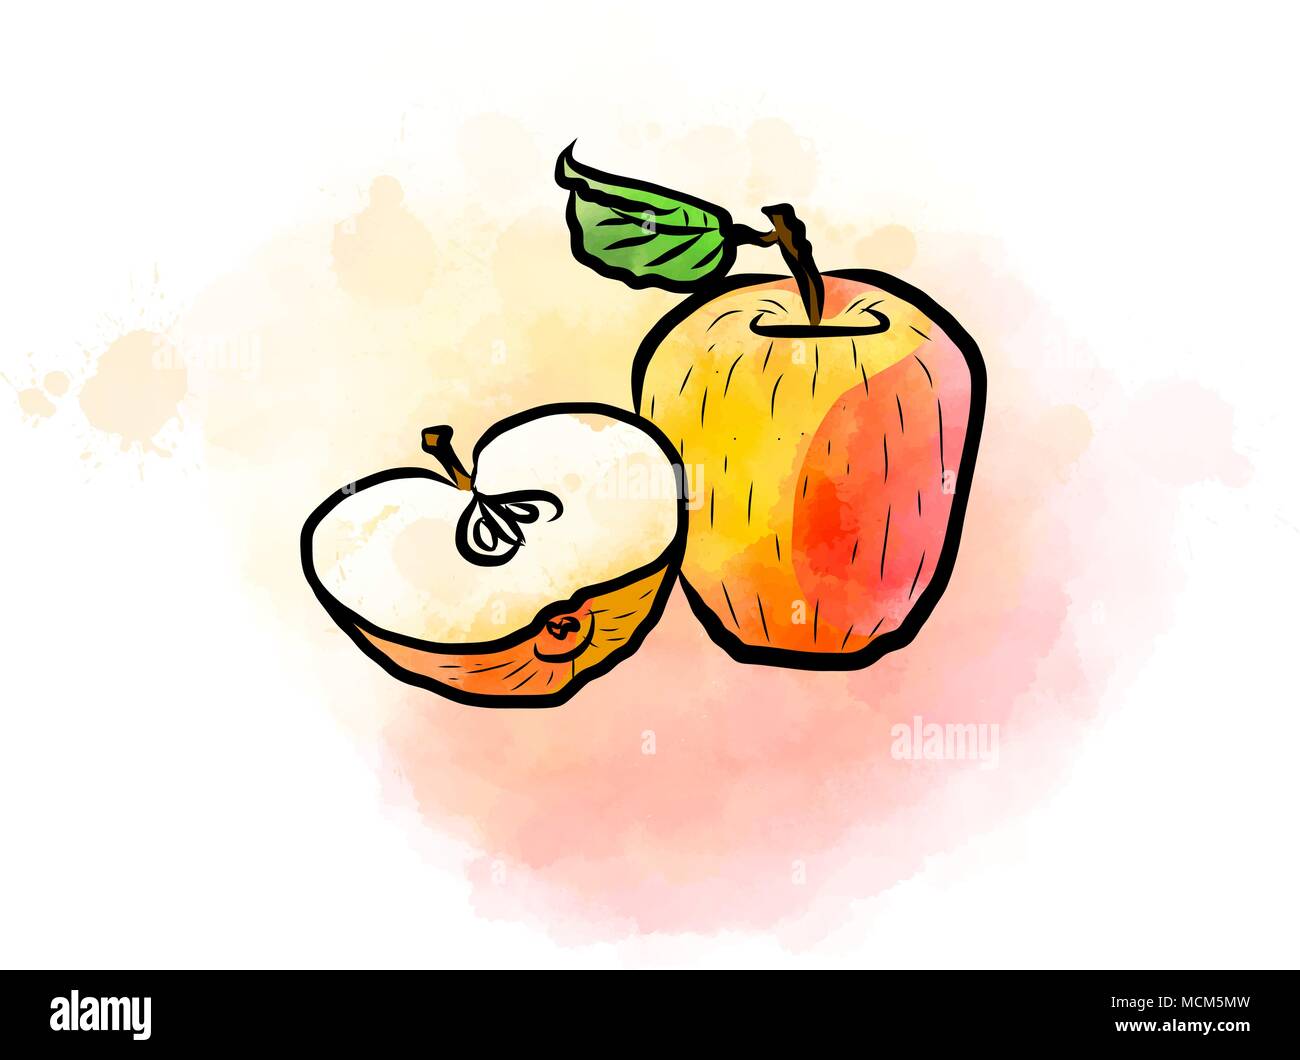 Colored drawing of apples. Fresh design of colorful fruits made in watercolor style. Vector marketing illustration on white background. Stock Vector